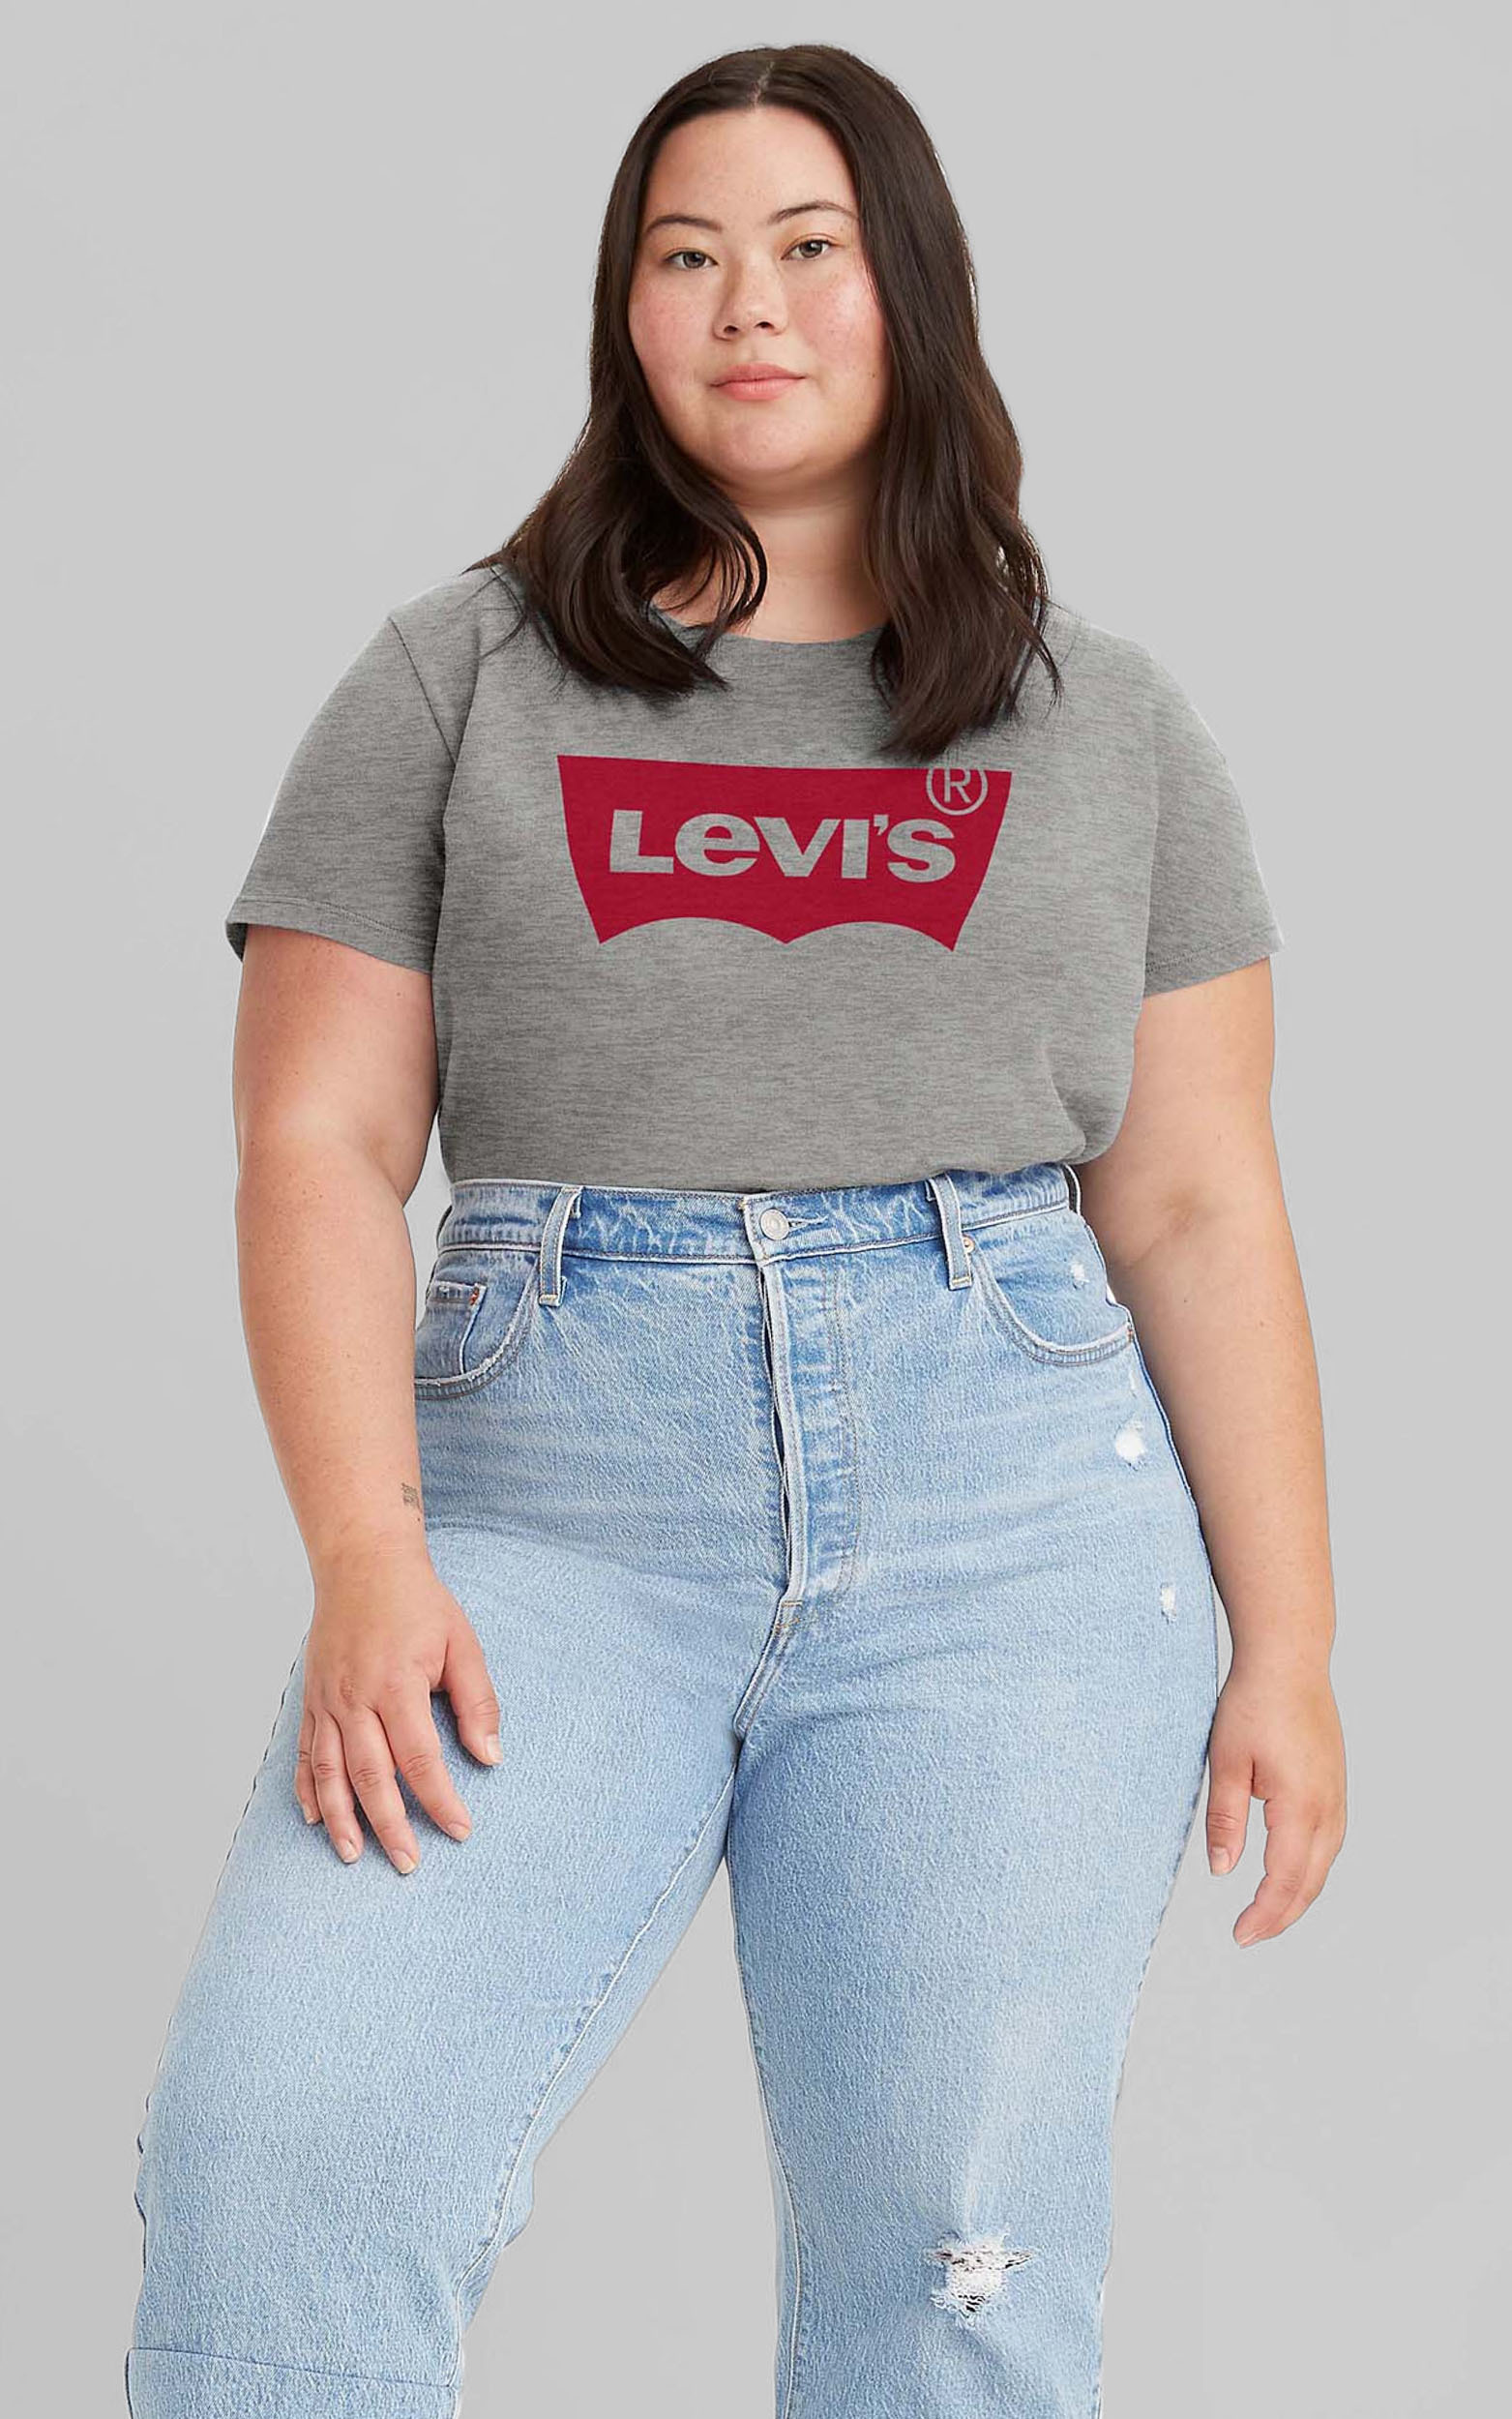 Levi's Curve - PERFECT TEE in STARSTRUCK HEATHER GREY - XL, GRY1, hi-res image number null